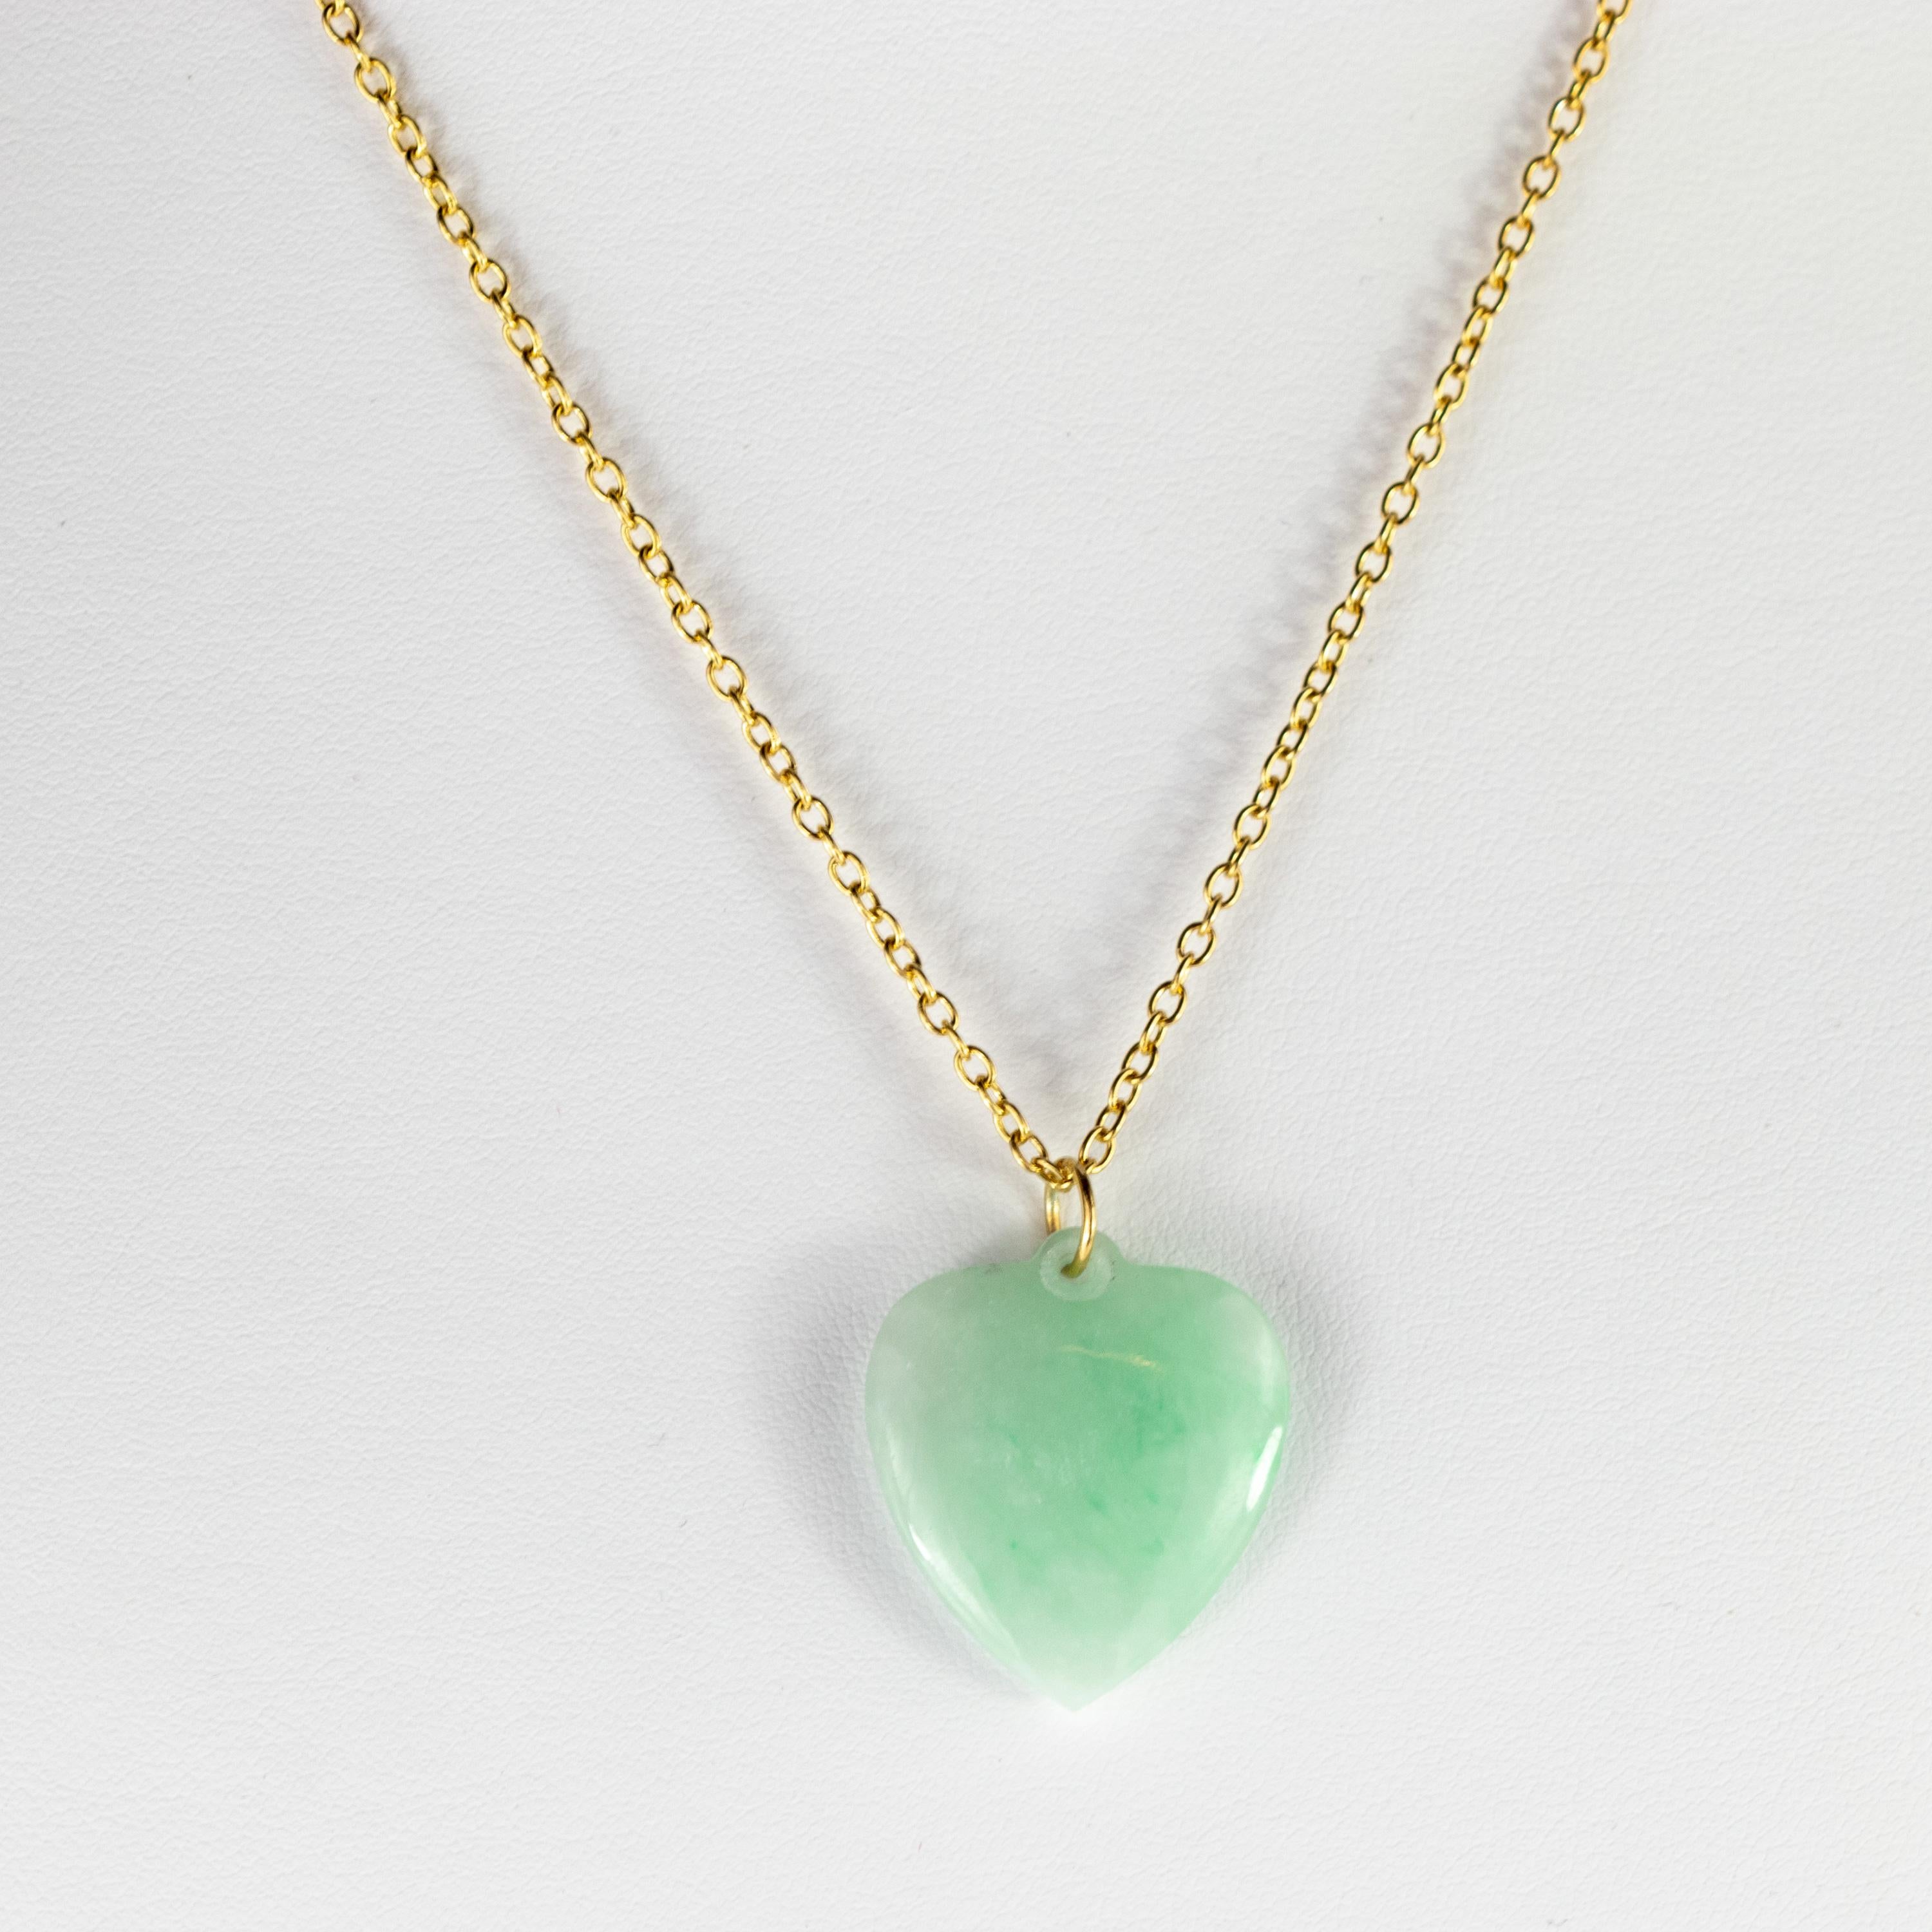 Take love with you everywhere! This breathtaking necklace has a sweet design with the most precious gemstone hanging from a delicate 9 karat yellow gold chain. The Natural 29 carats Jade activates spiritual awareness, opens intuition and enhances